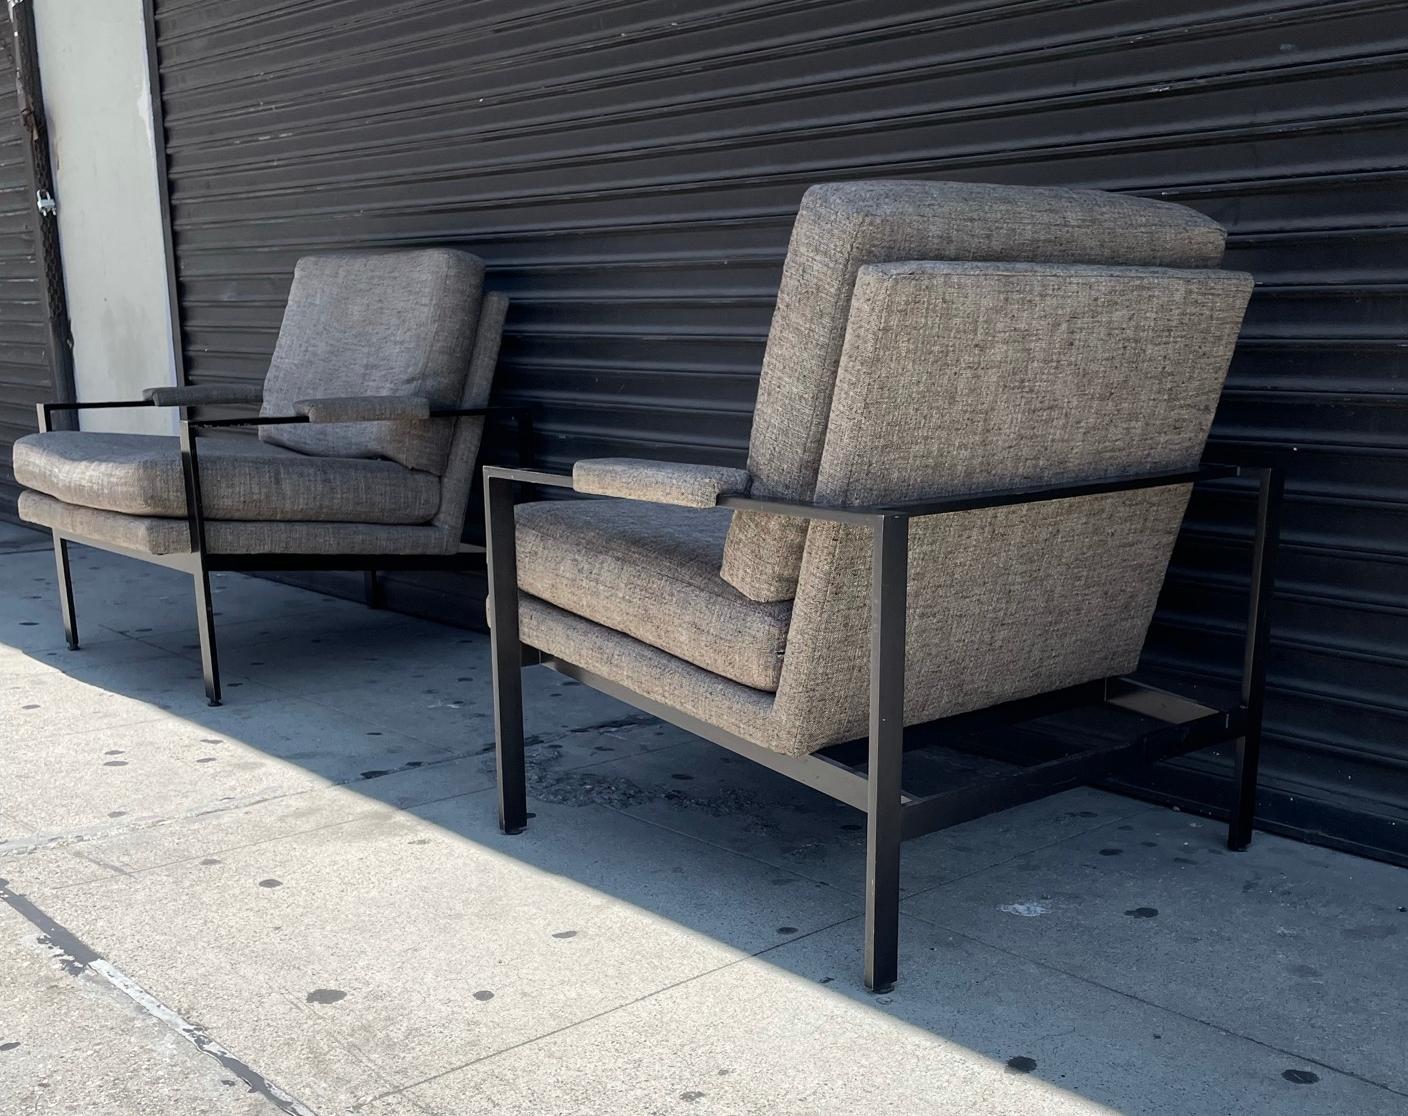 These beautiful lounge armchairs are by Milo Baughman for Thayer Coggin, designed in 1966, and produced by Thayer Coggin in High Point, North Carolina, made in the USA. 

The flat bar metal frames have a black finish and the seats are upholstered